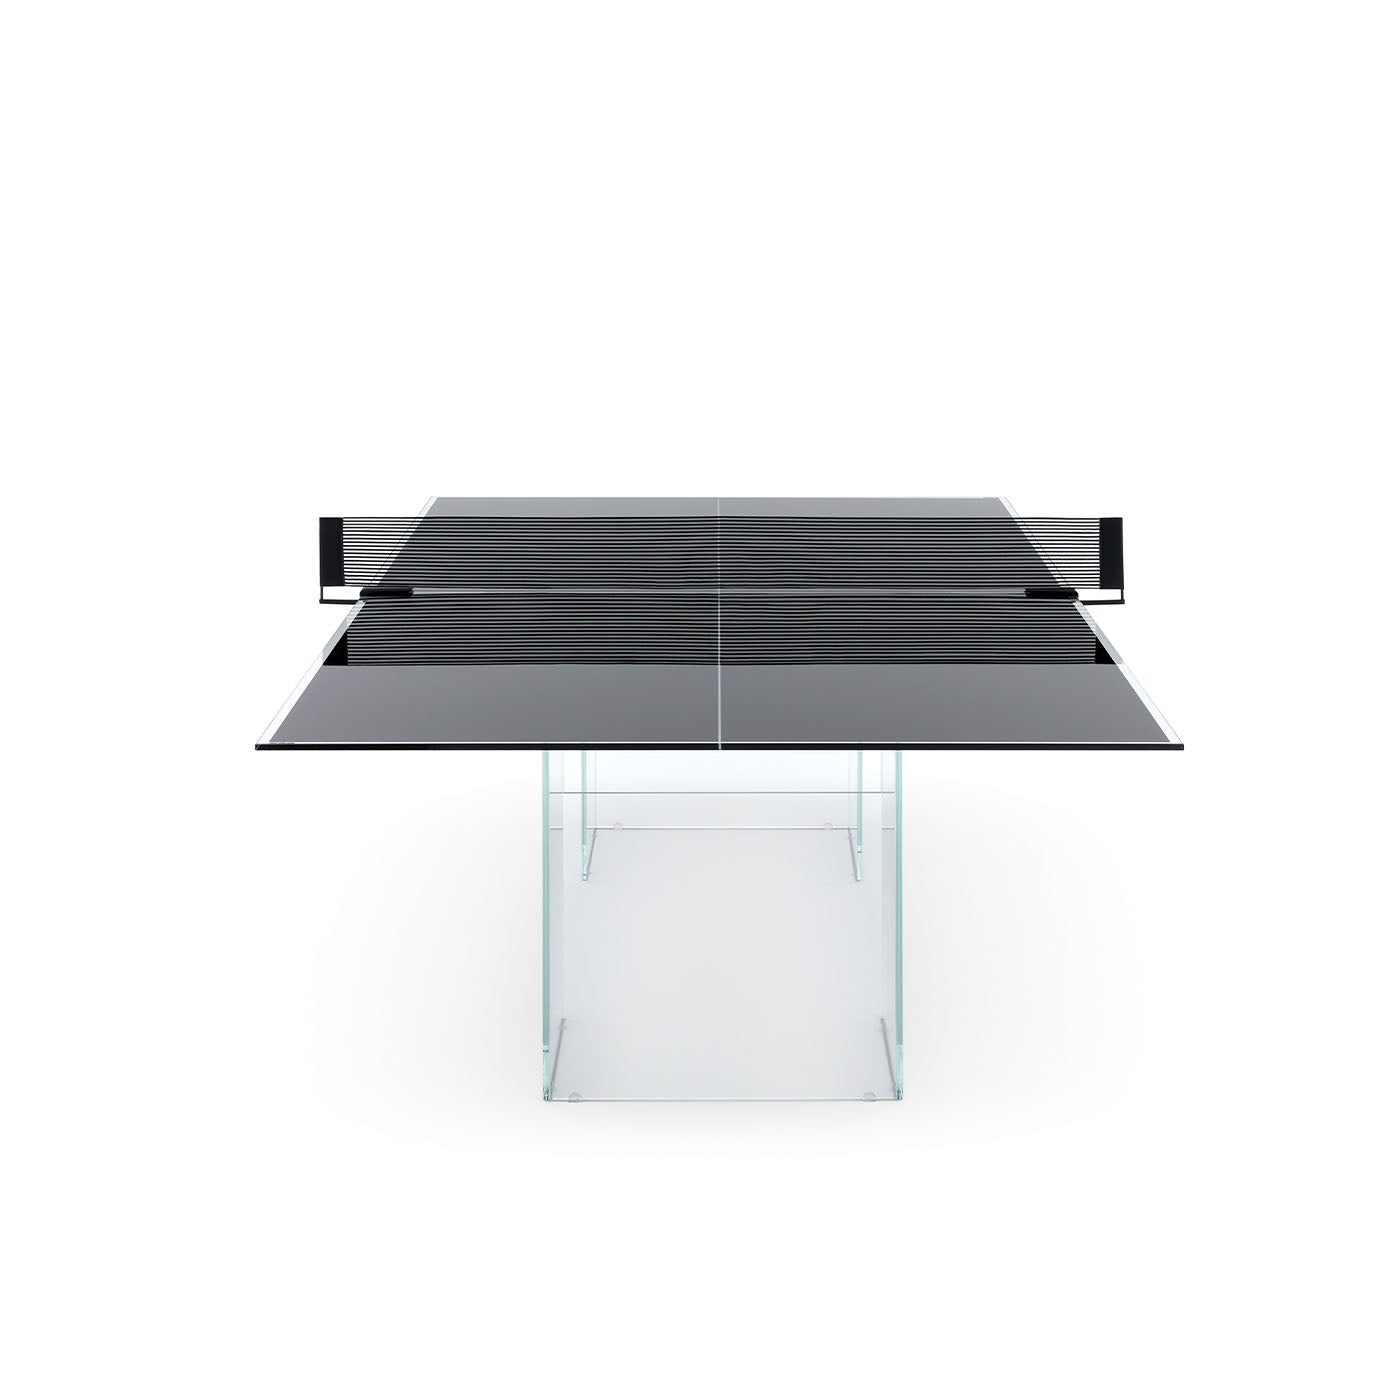 Crystal Black Ping Pong Table - Alternative view 2